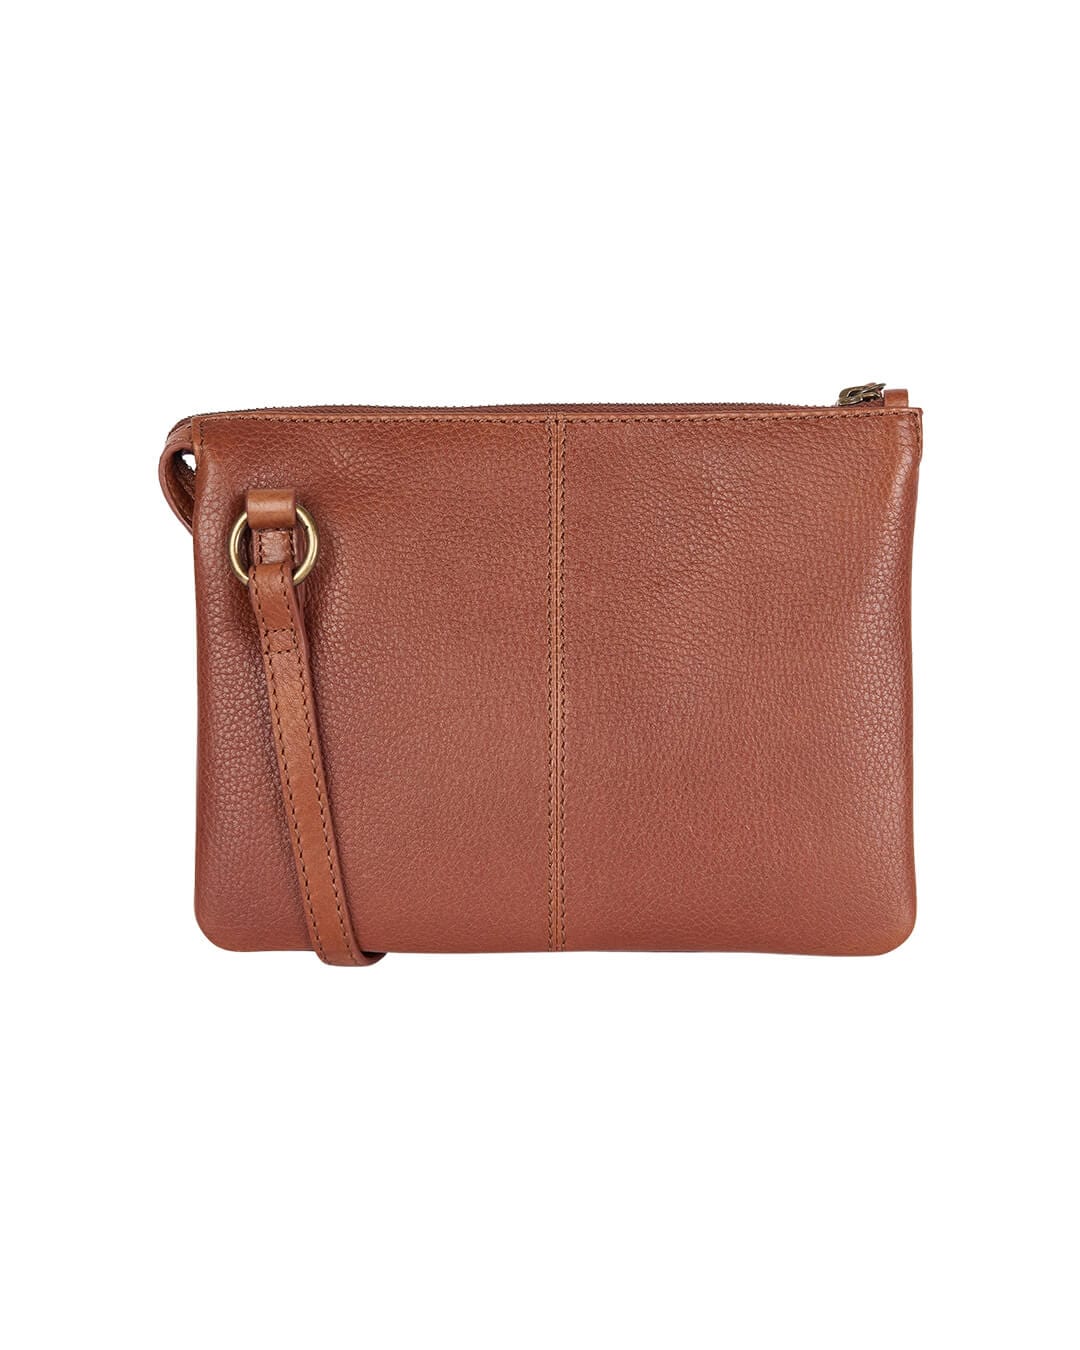 Barbour Bags ONE Barbour Lochy Brown Leather Crossbody Bag